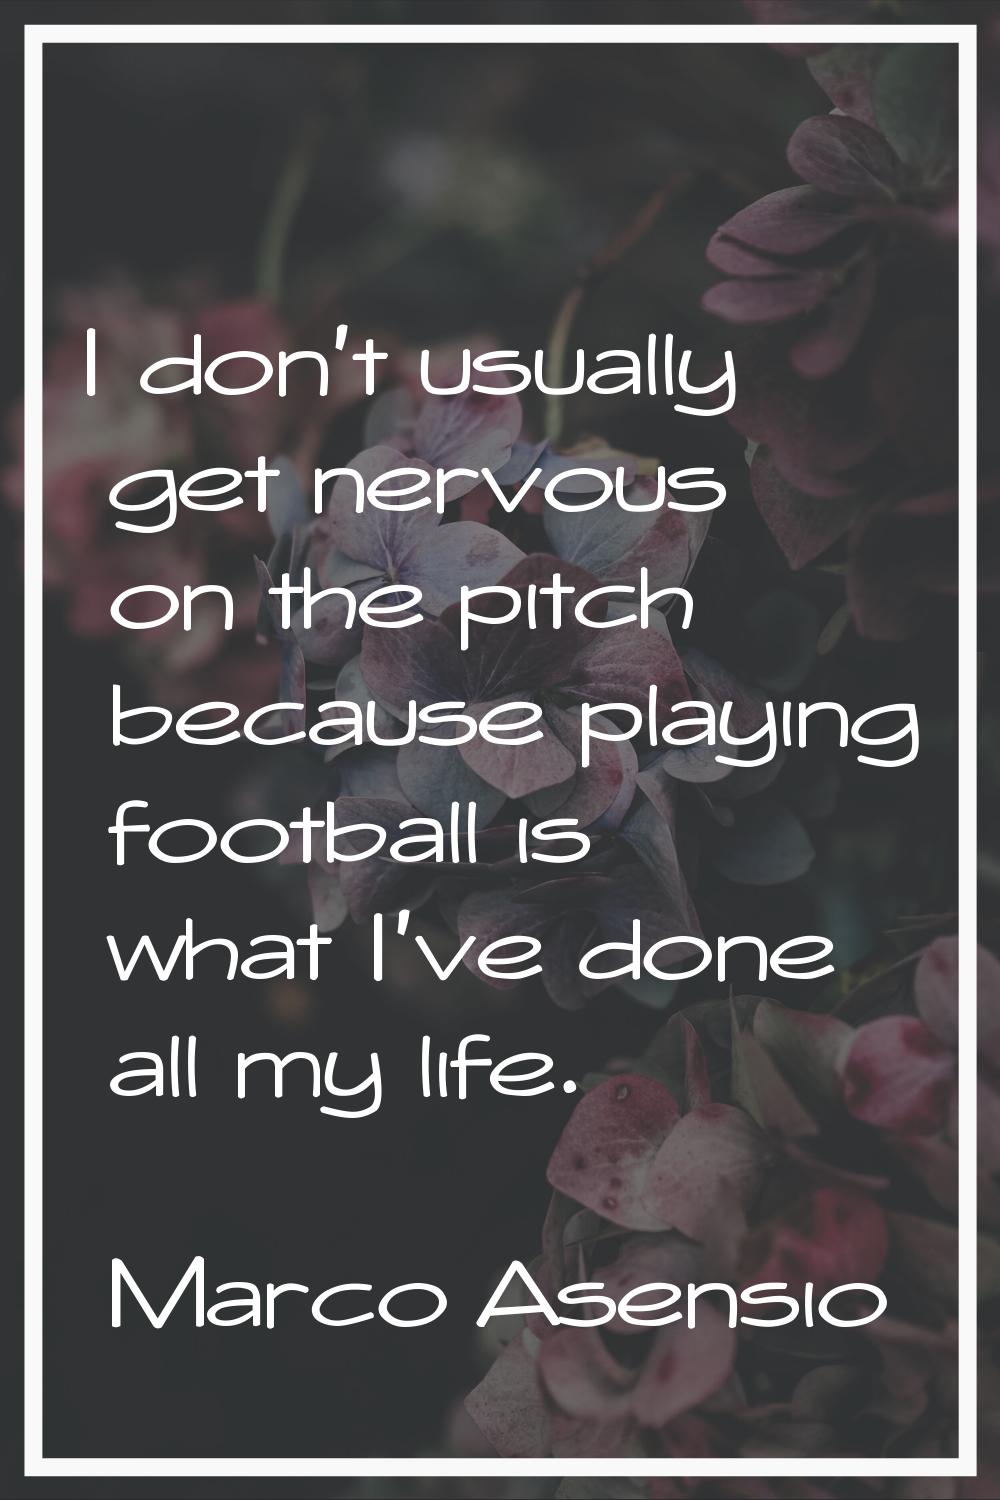 I don't usually get nervous on the pitch because playing football is what I've done all my life.